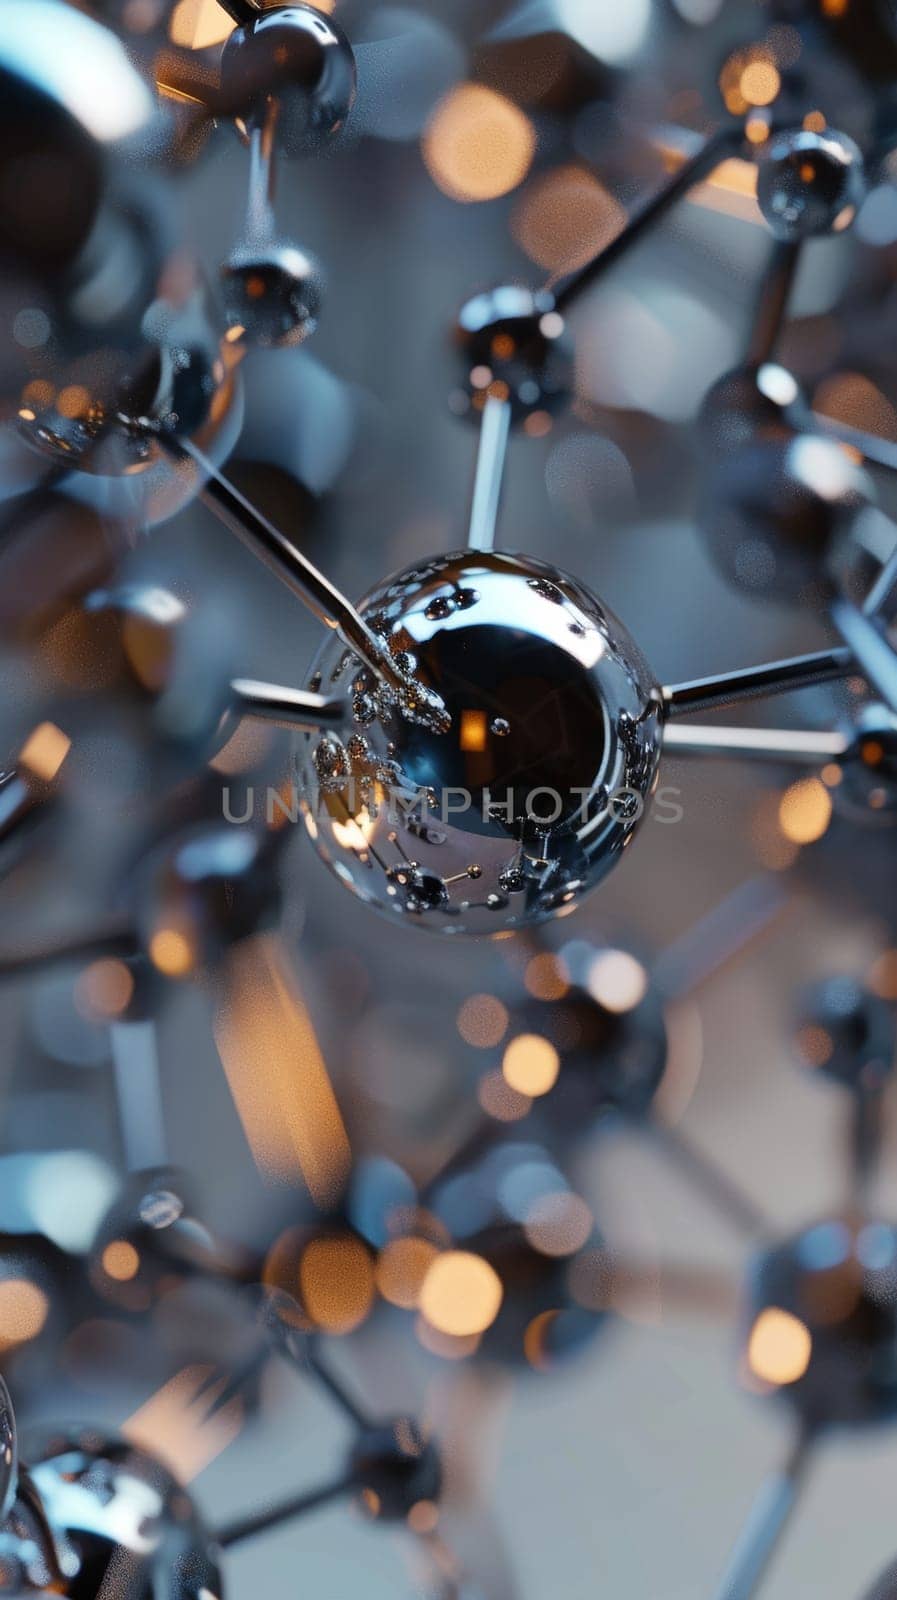 A close-up view features a detailed metallic molecular model with a bokeh background, emphasizing the reflections on the shiny surfaces. by sfinks